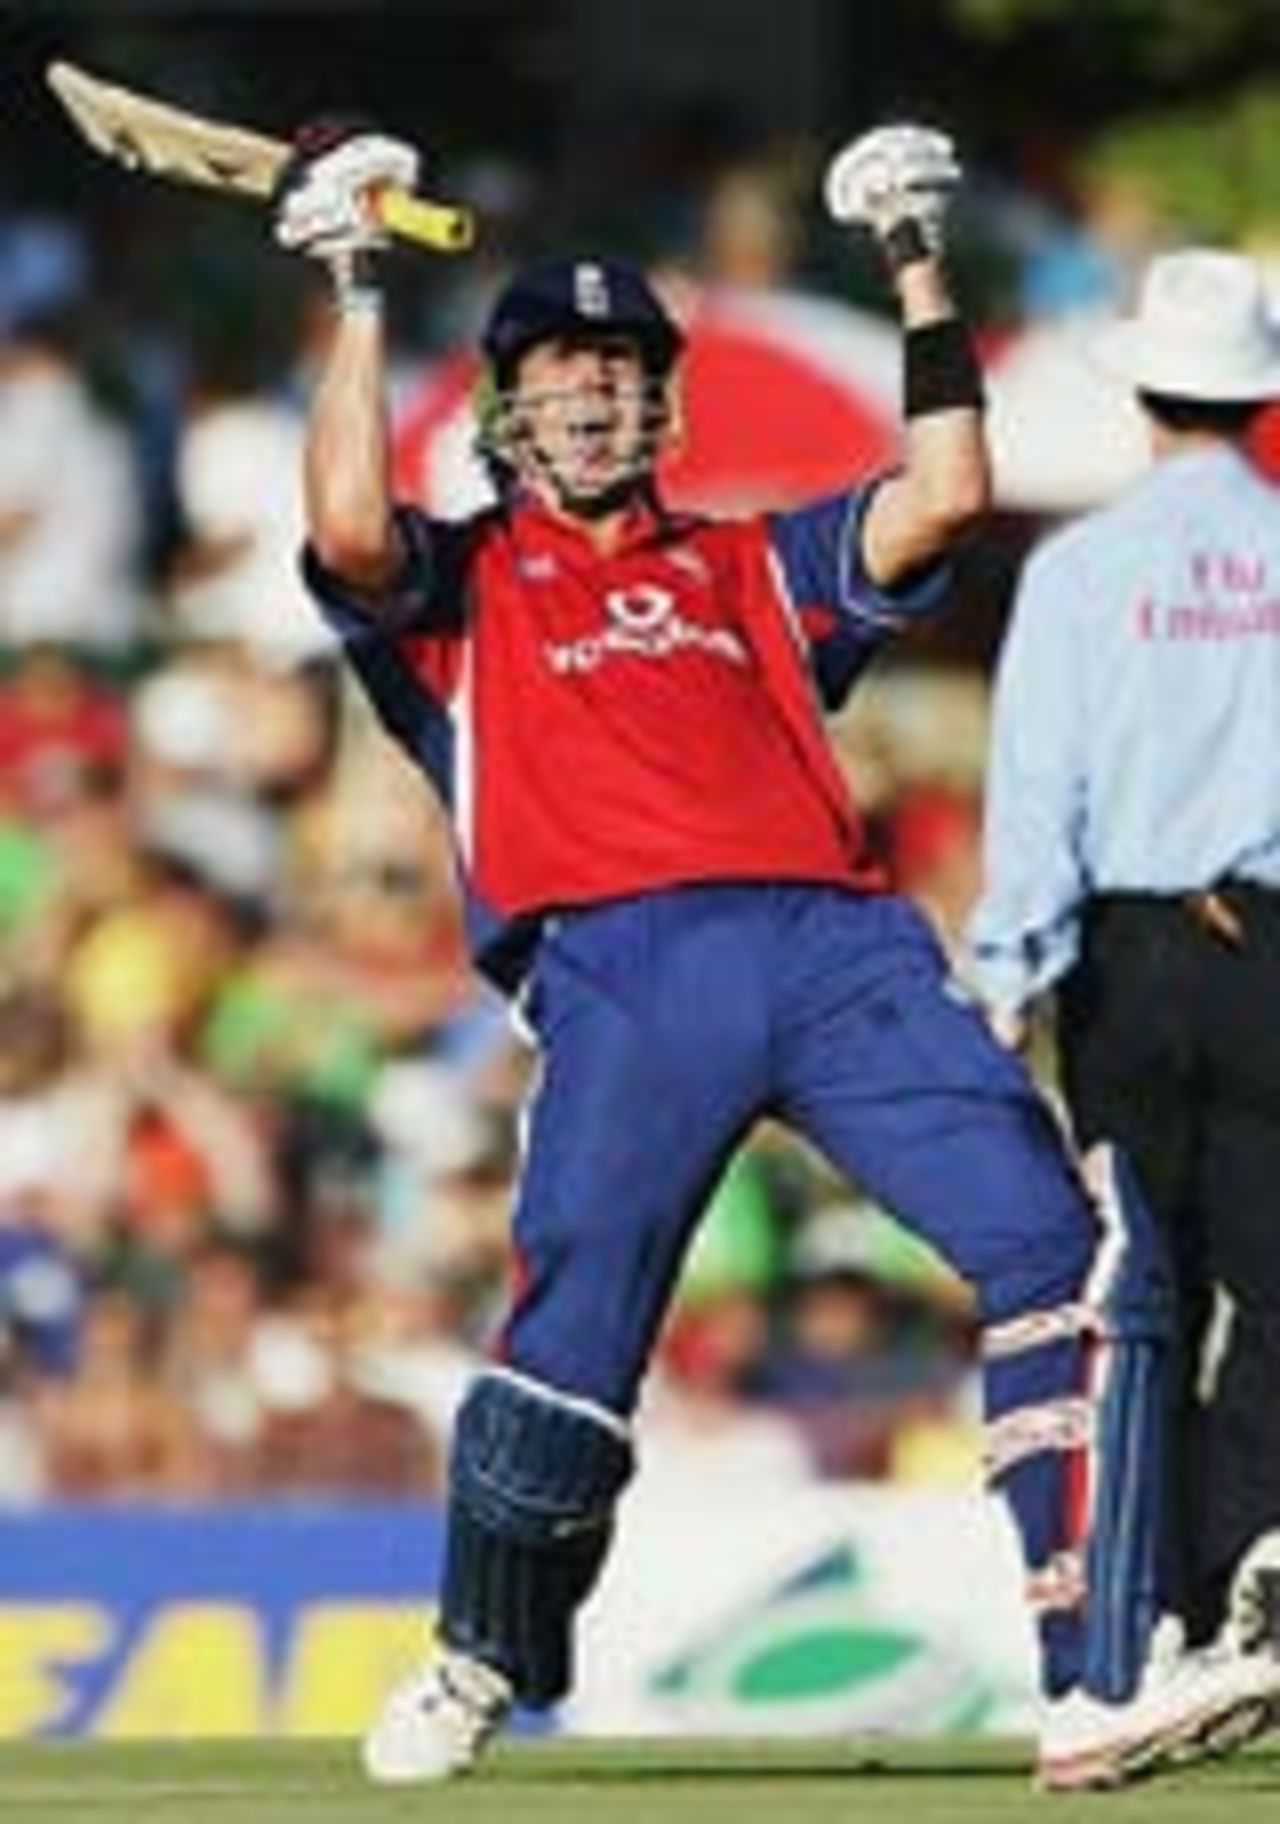 Kevin Pietersen celebrates his maiden one-day century, England v South Africa, Bloemfontein, 2nd ODI, February 2, 2005